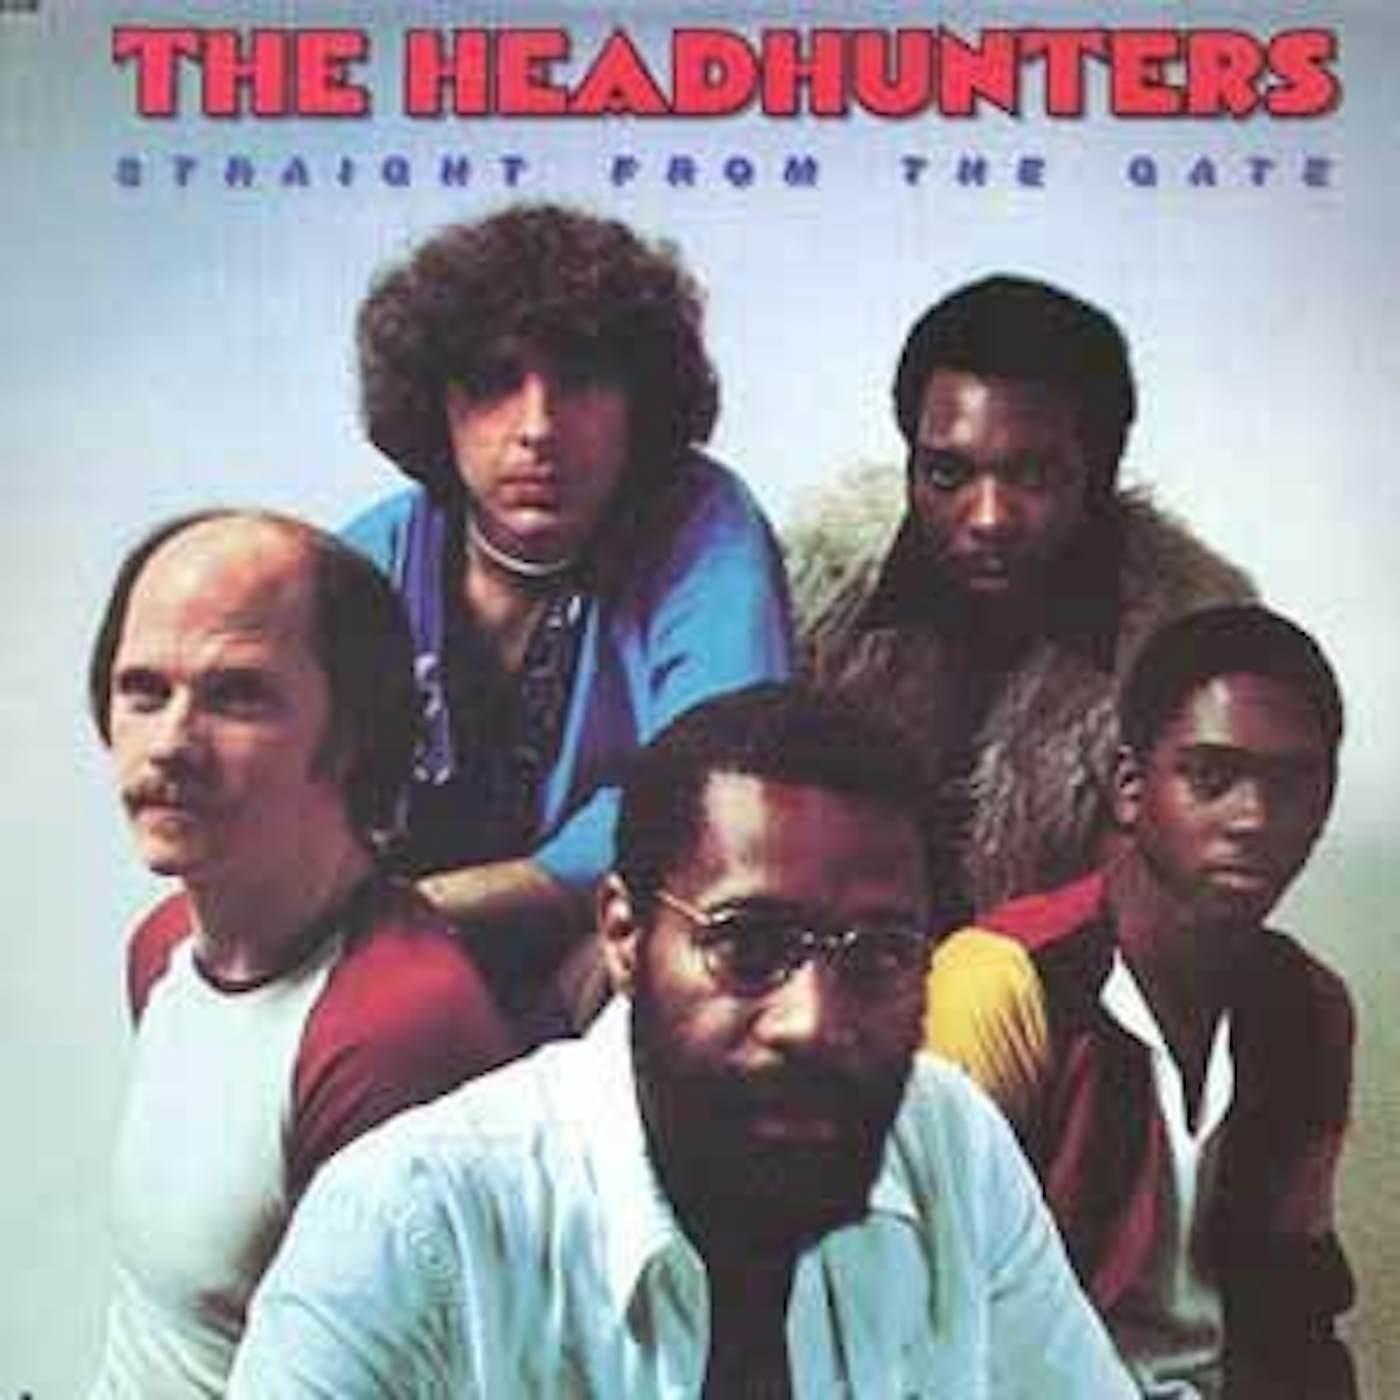 Headhunters STRAIGHT FROM THE GATE Vinyl Record